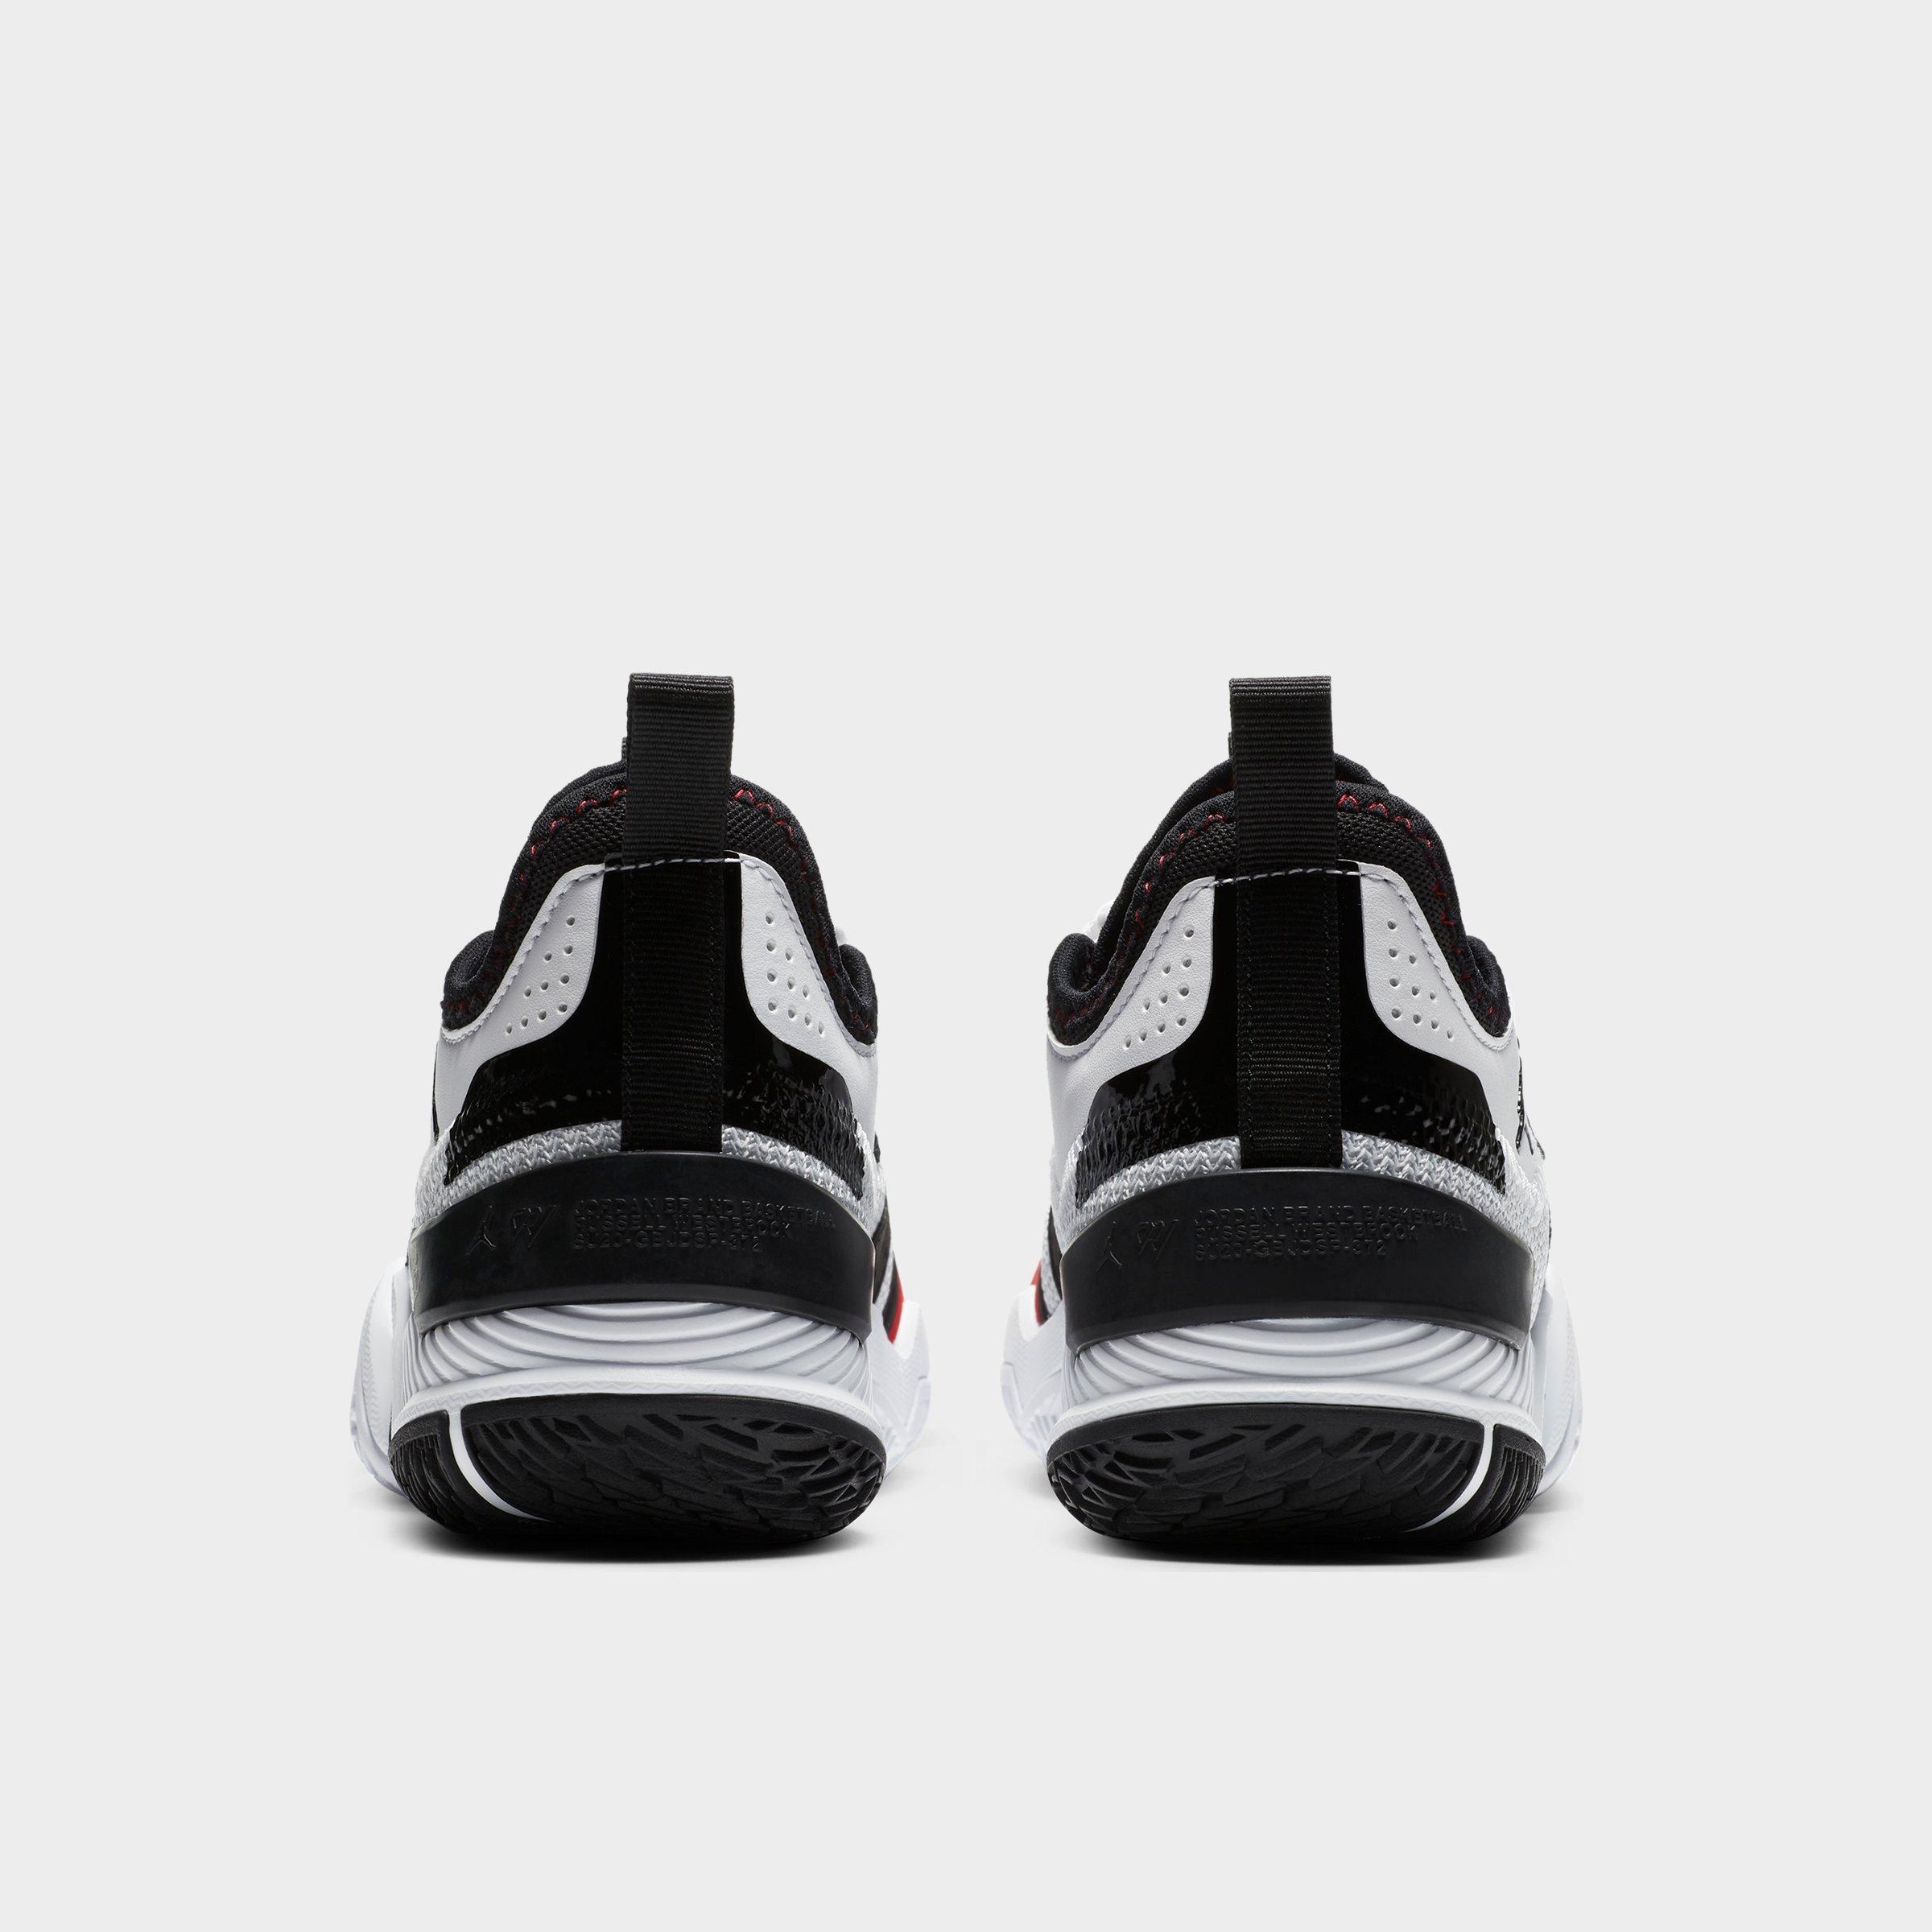 westbrook toddler shoes